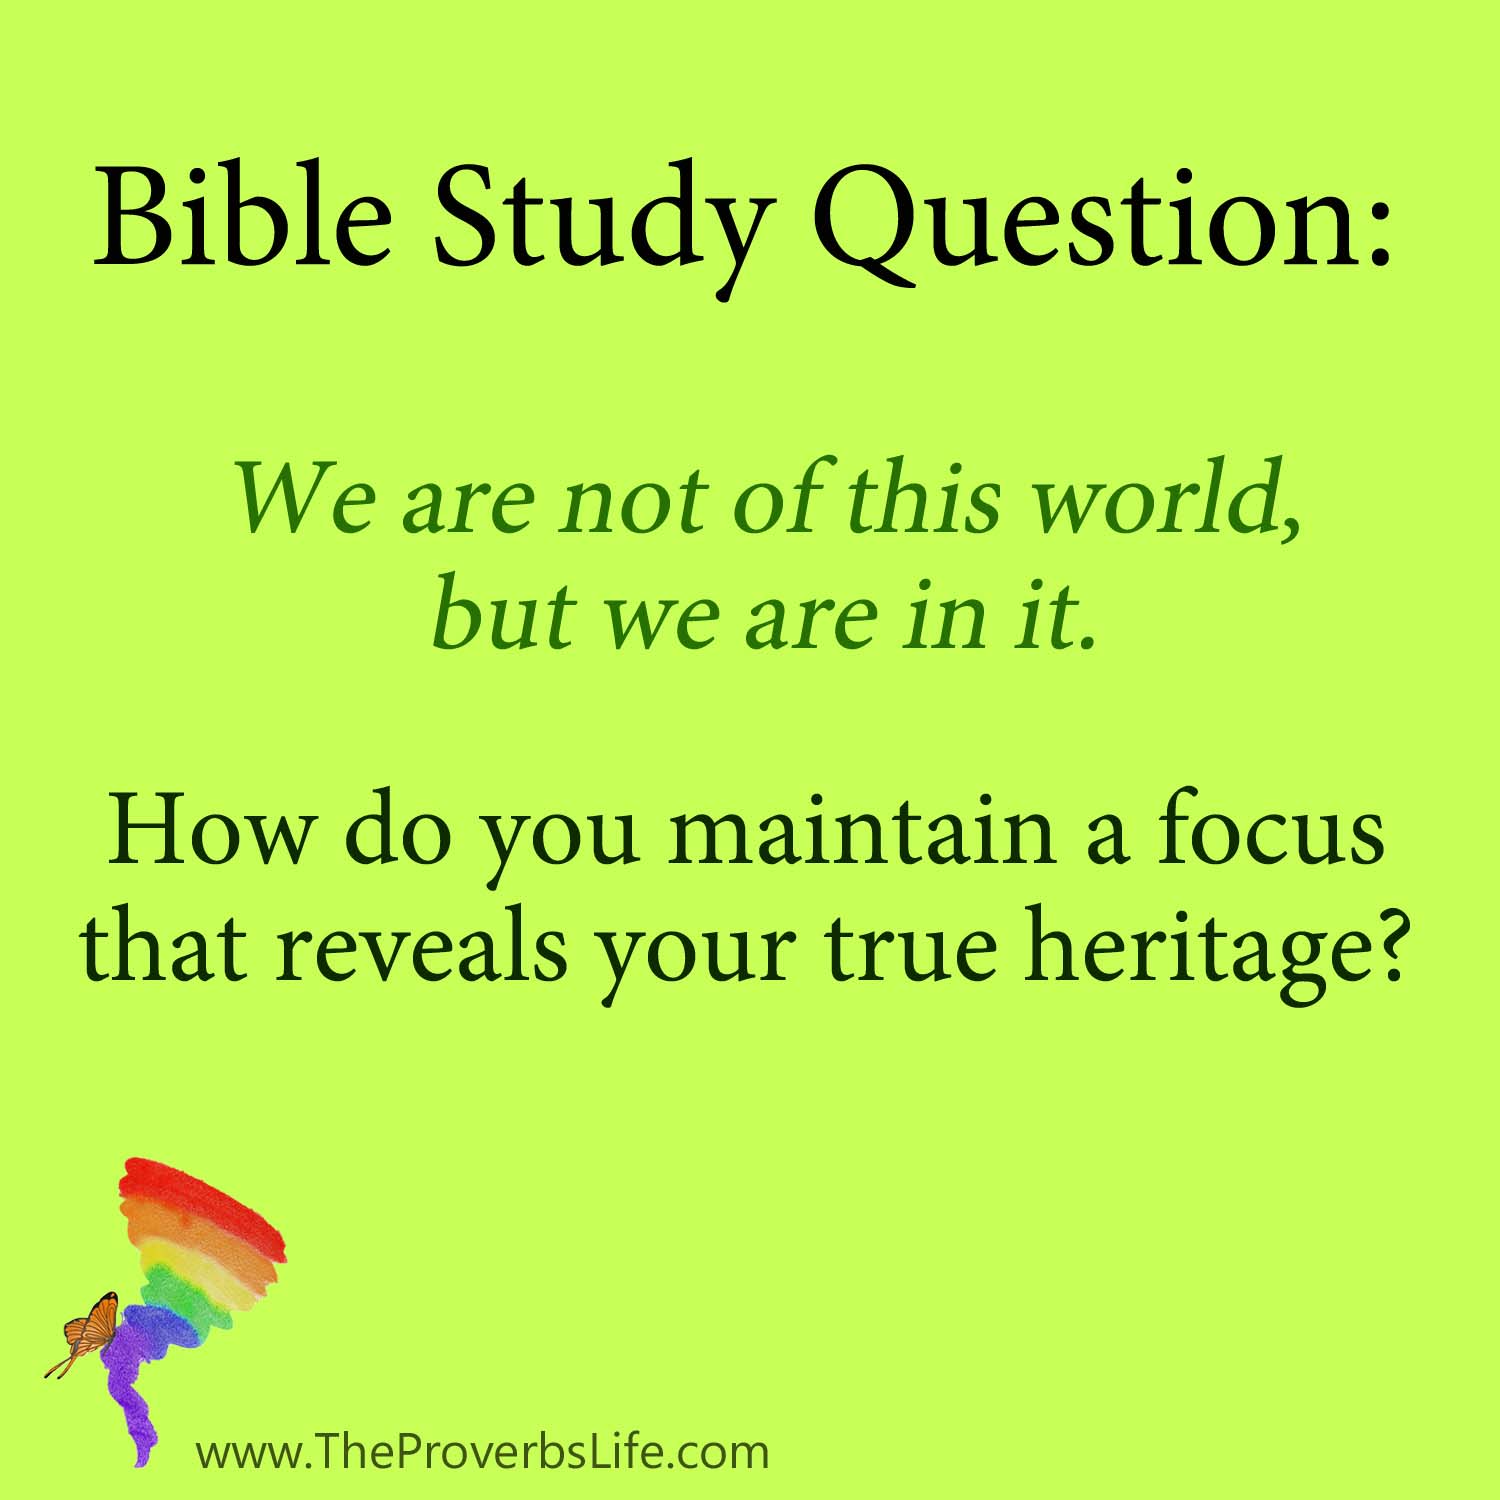 Bible Study Question - not of this world